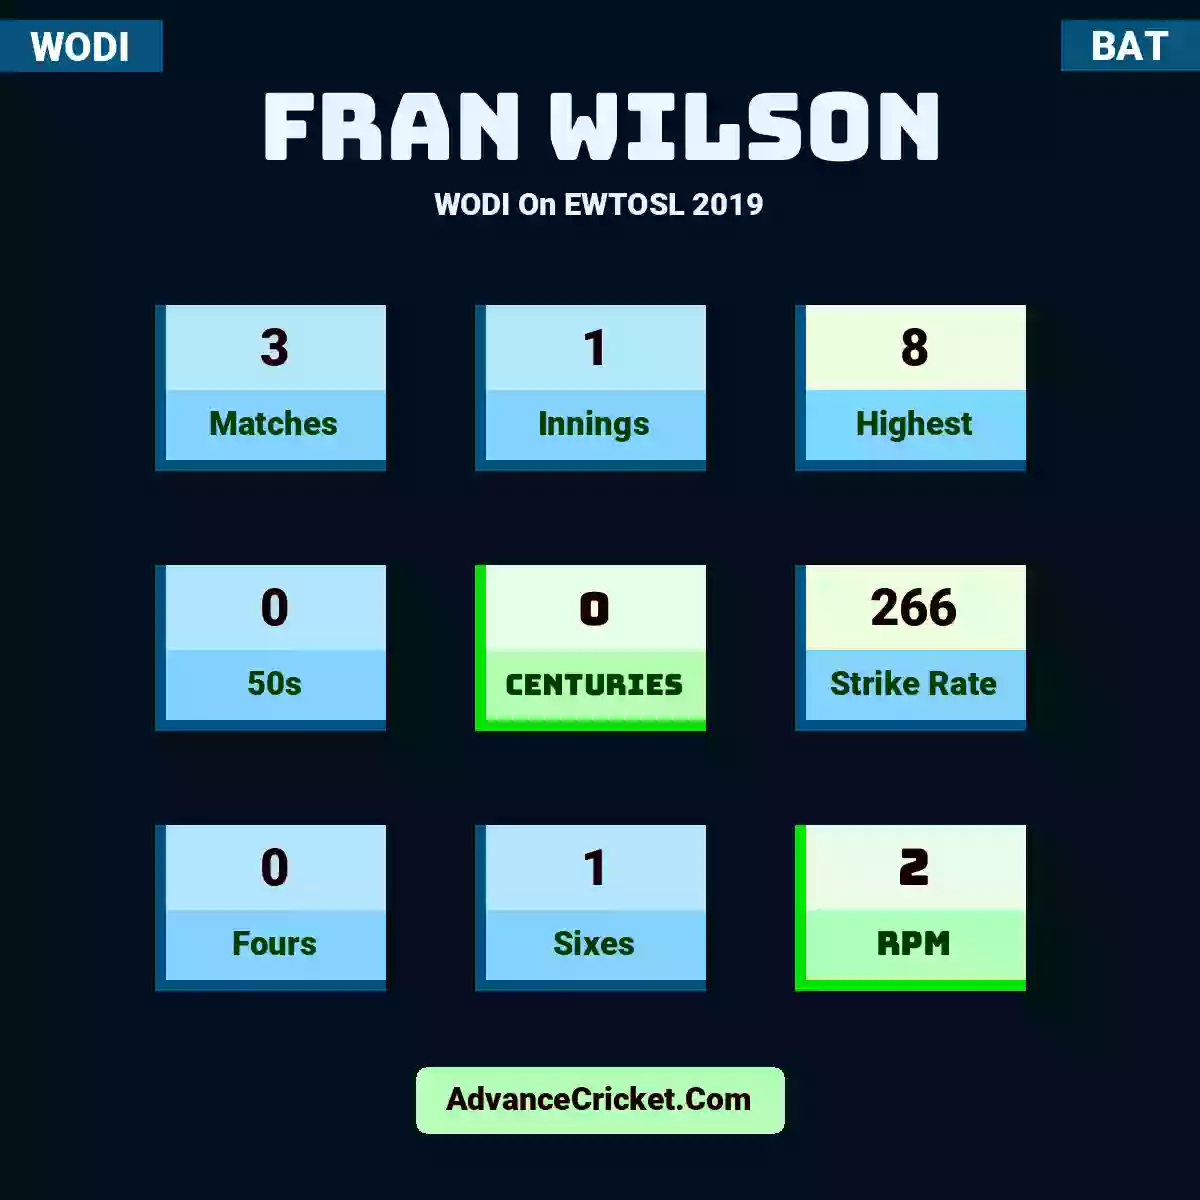 Fran Wilson WODI  On EWTOSL 2019, Fran Wilson played 3 matches, scored 8 runs as highest, 0 half-centuries, and 0 centuries, with a strike rate of 266. F.Wilson hit 0 fours and 1 sixes, with an RPM of 2.